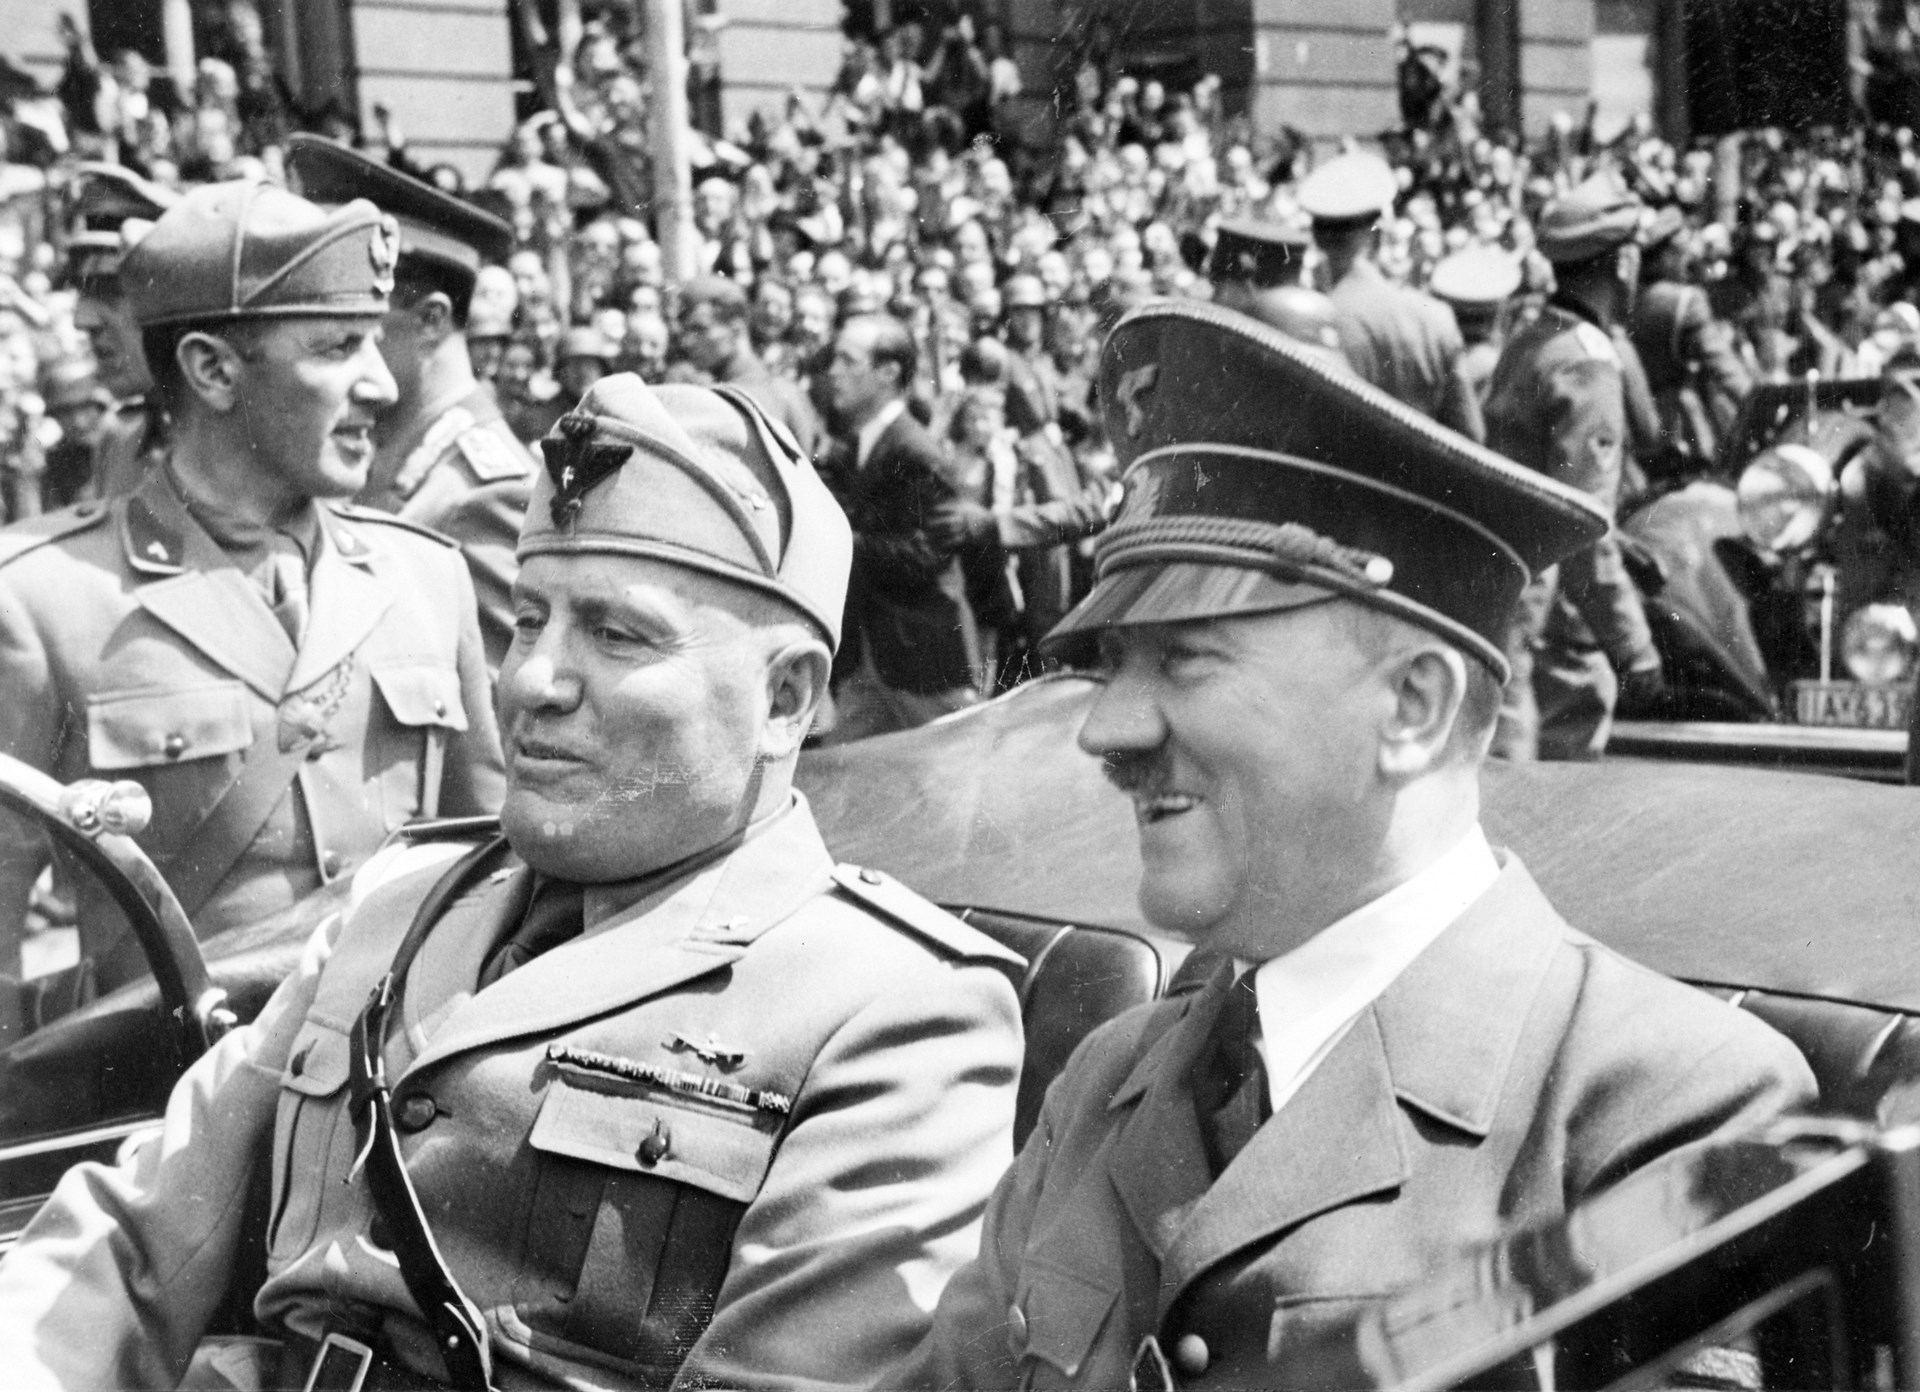 Hitler and Mussolini riding together in open-top car during a military parade black/white image